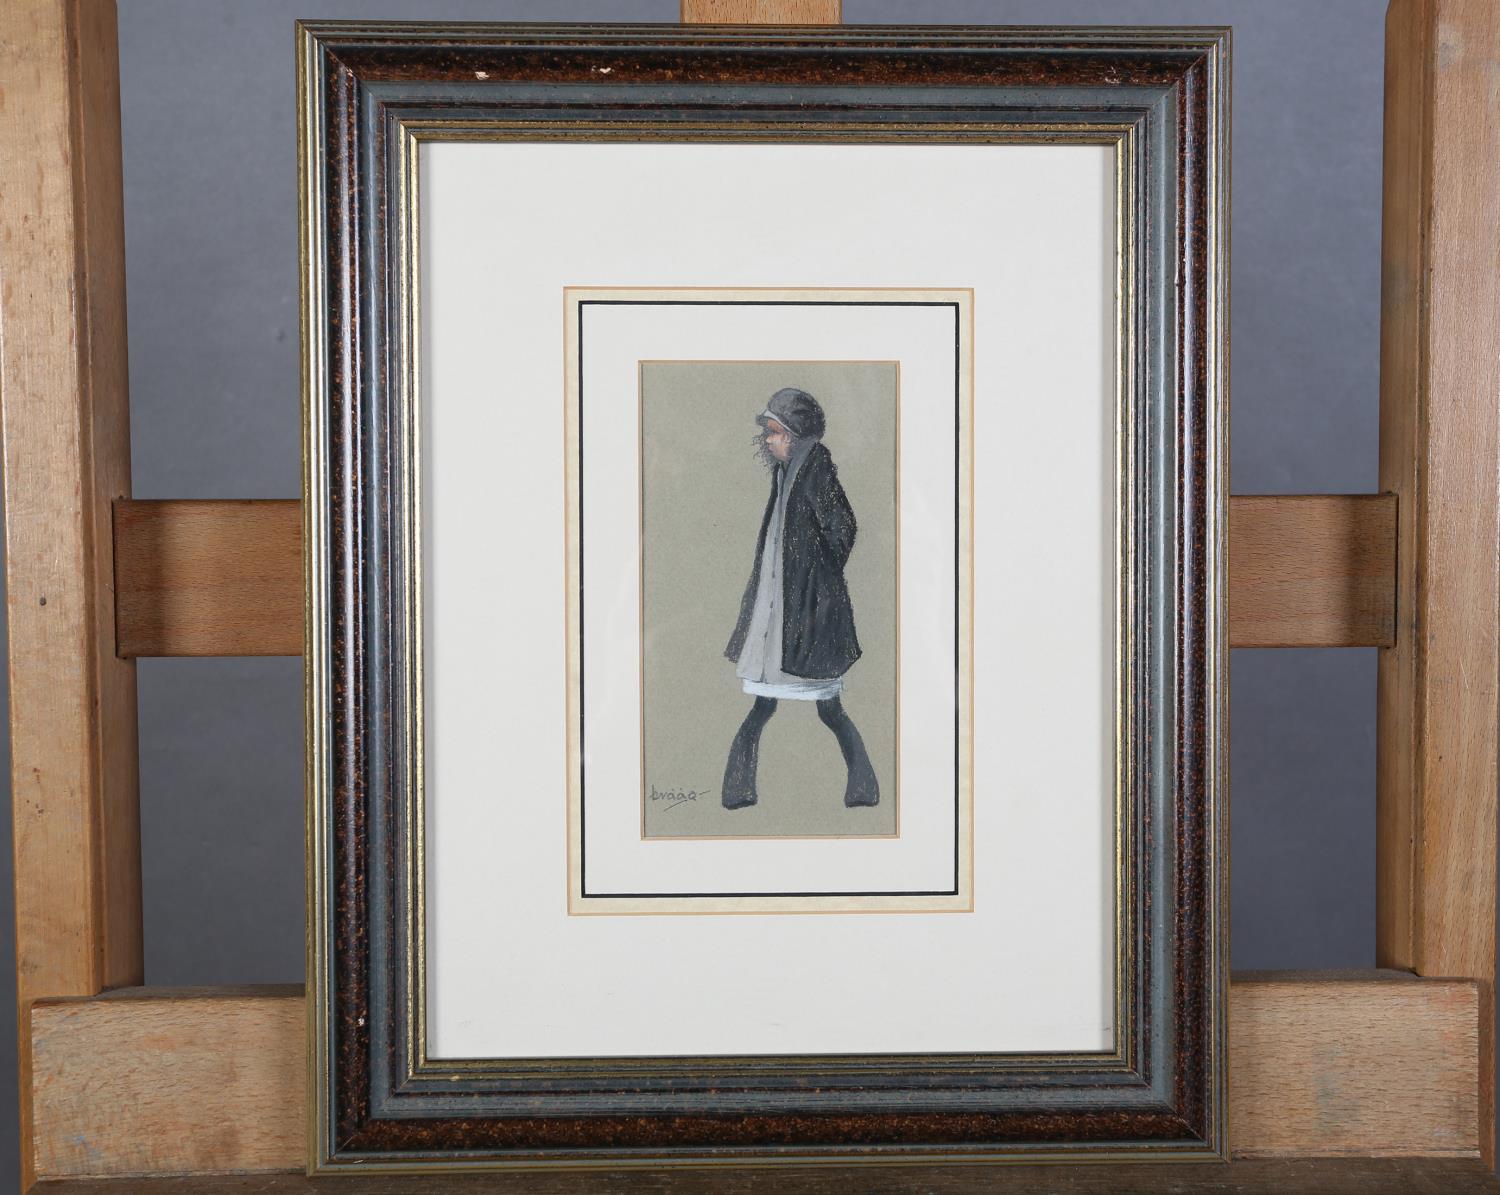 ARR Brian Shield 'braaq' (1951-1997), portrait of a girl wearing hat and coat, standing, pastel, - Image 2 of 5